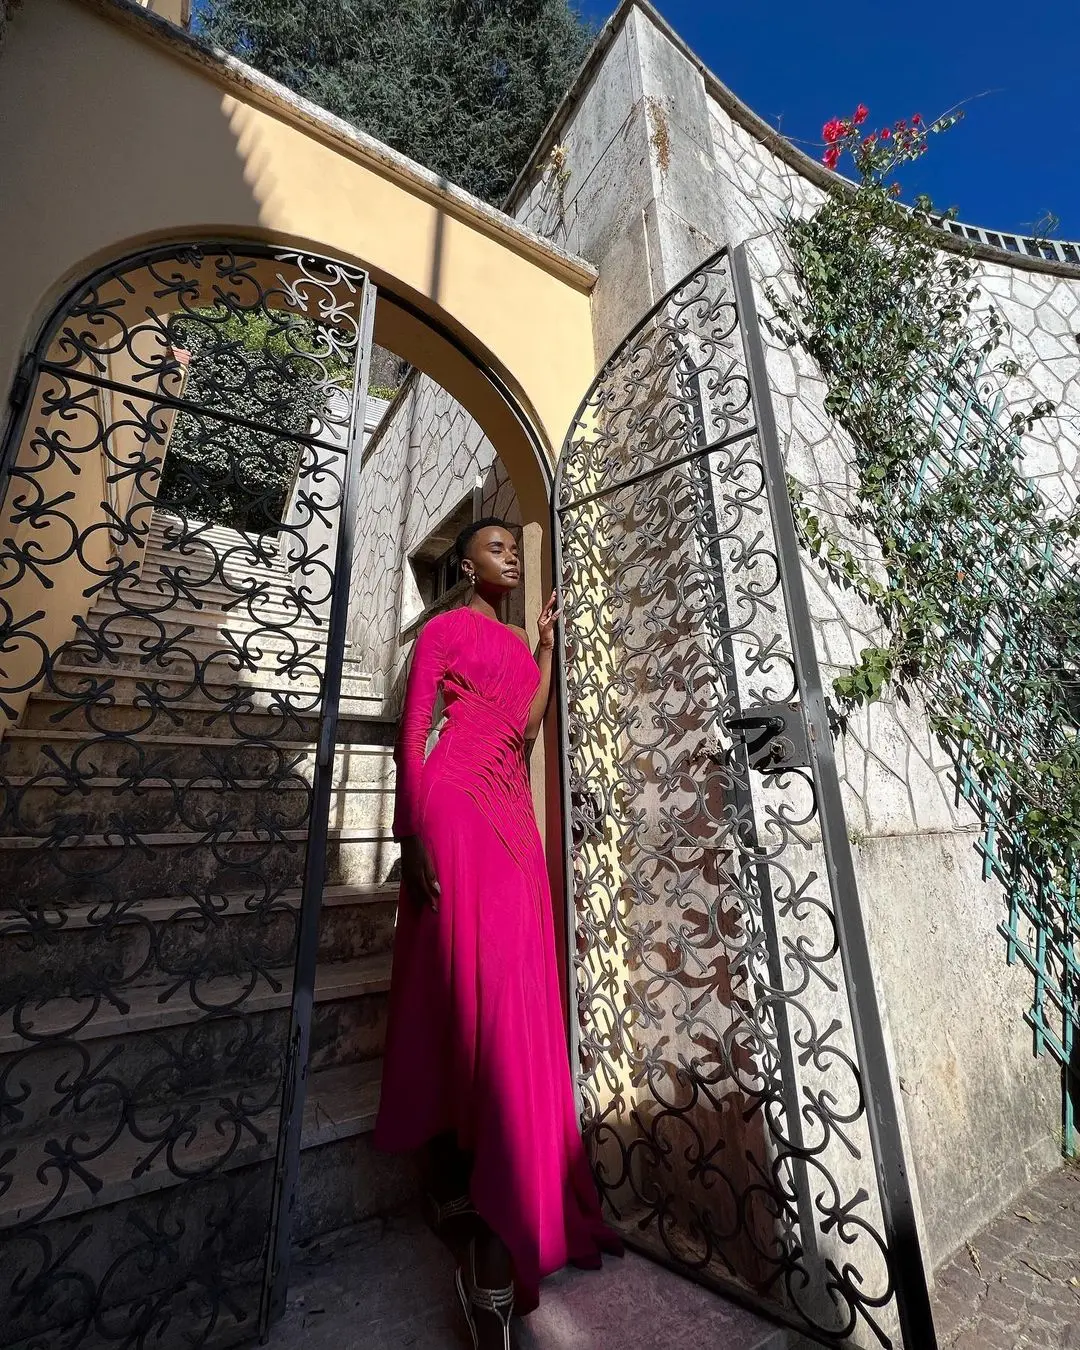 Former Miss Universe Zozi Tunzi on vacation in Italy